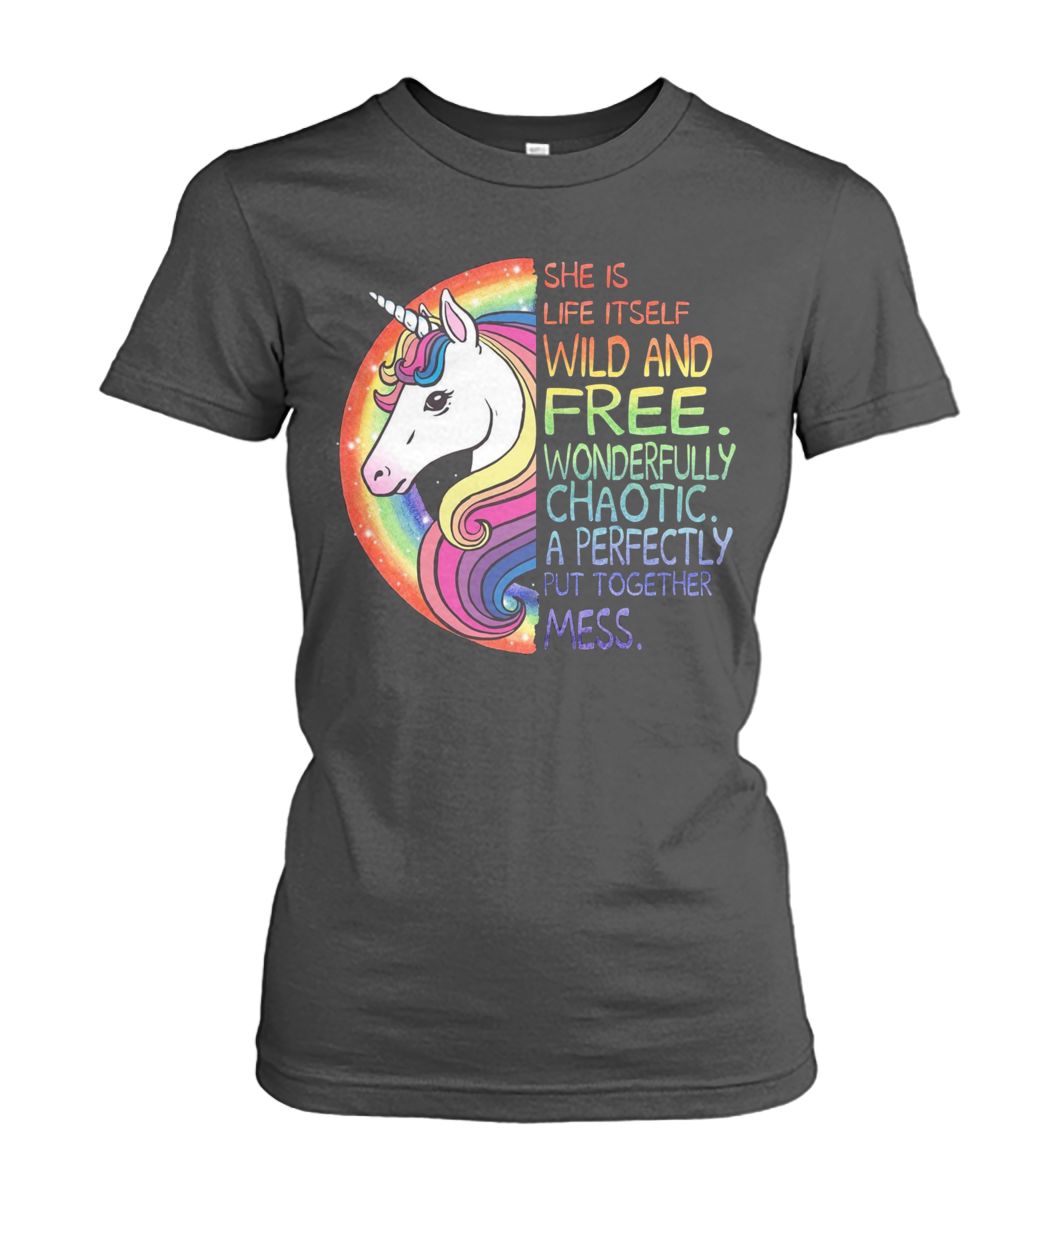 She is life itself wild and free wonderfully chaotic a perfectly put together mess unicorn women's crew tee